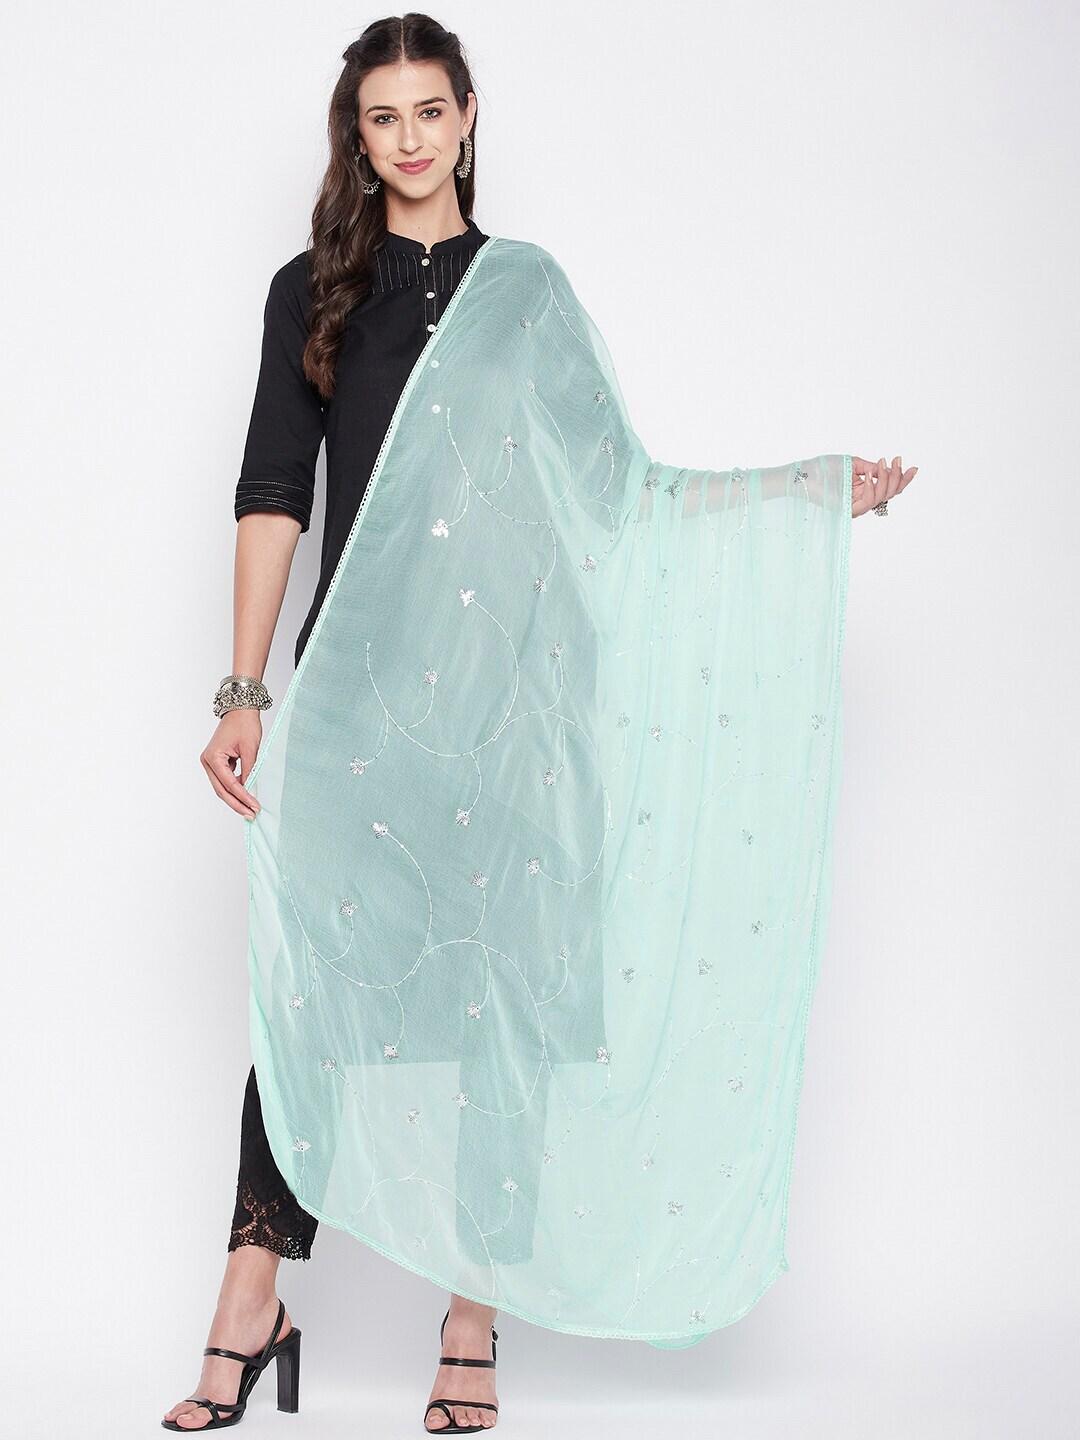 Clora Creation Embroidered Chiffon Dupatta With Sequinned